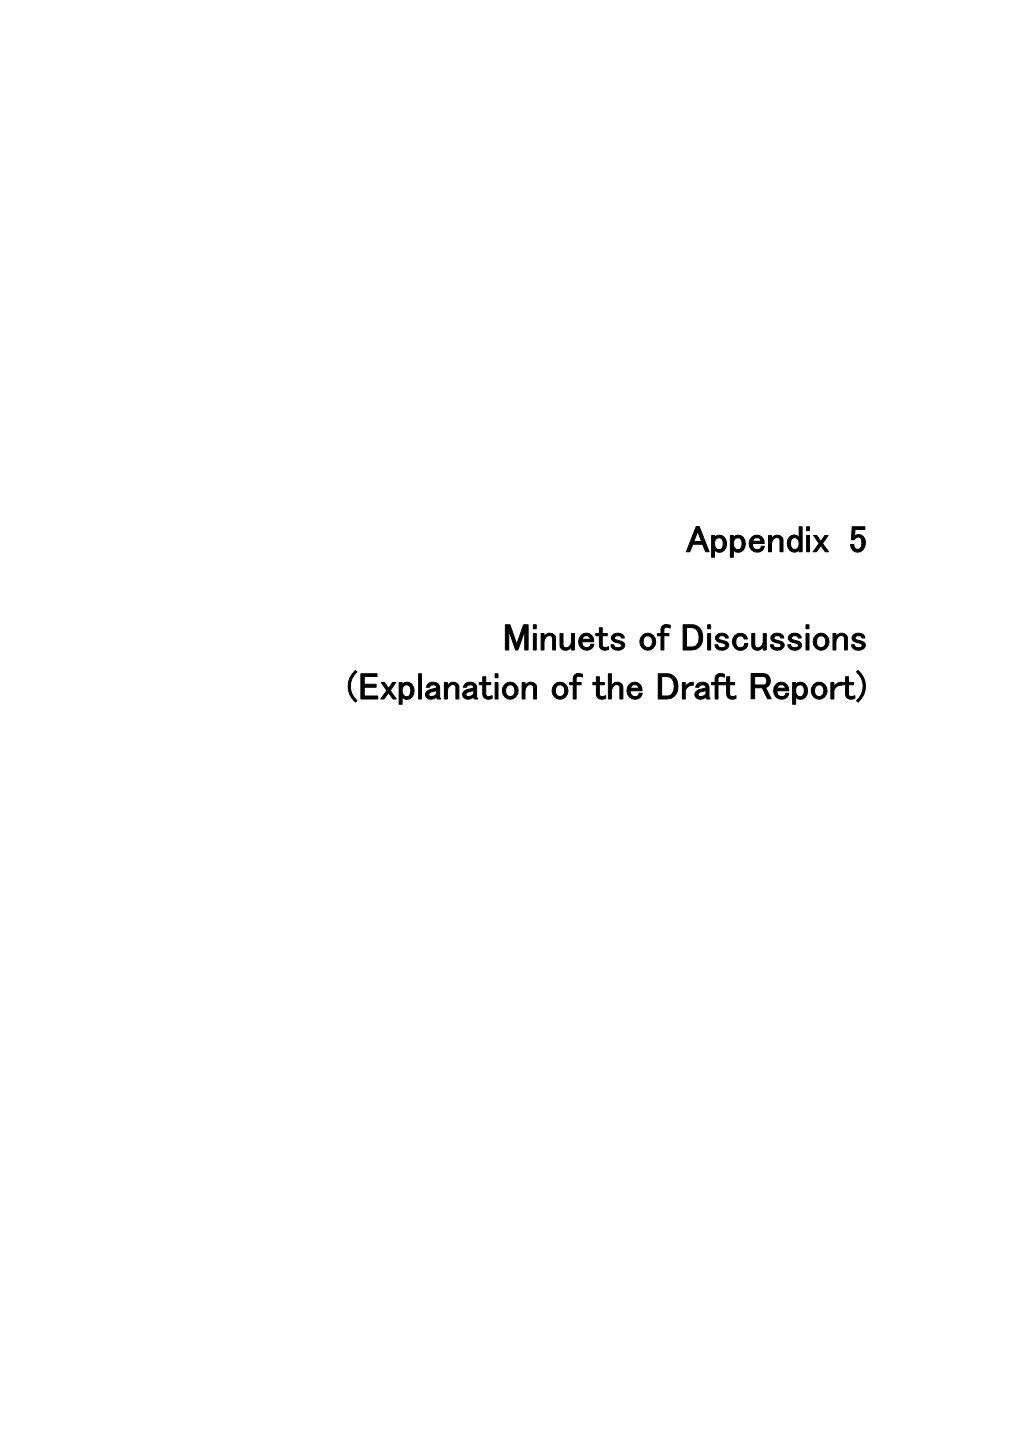 Appendix 5 Minuets of Discussions (Explanation of the Draft Report)